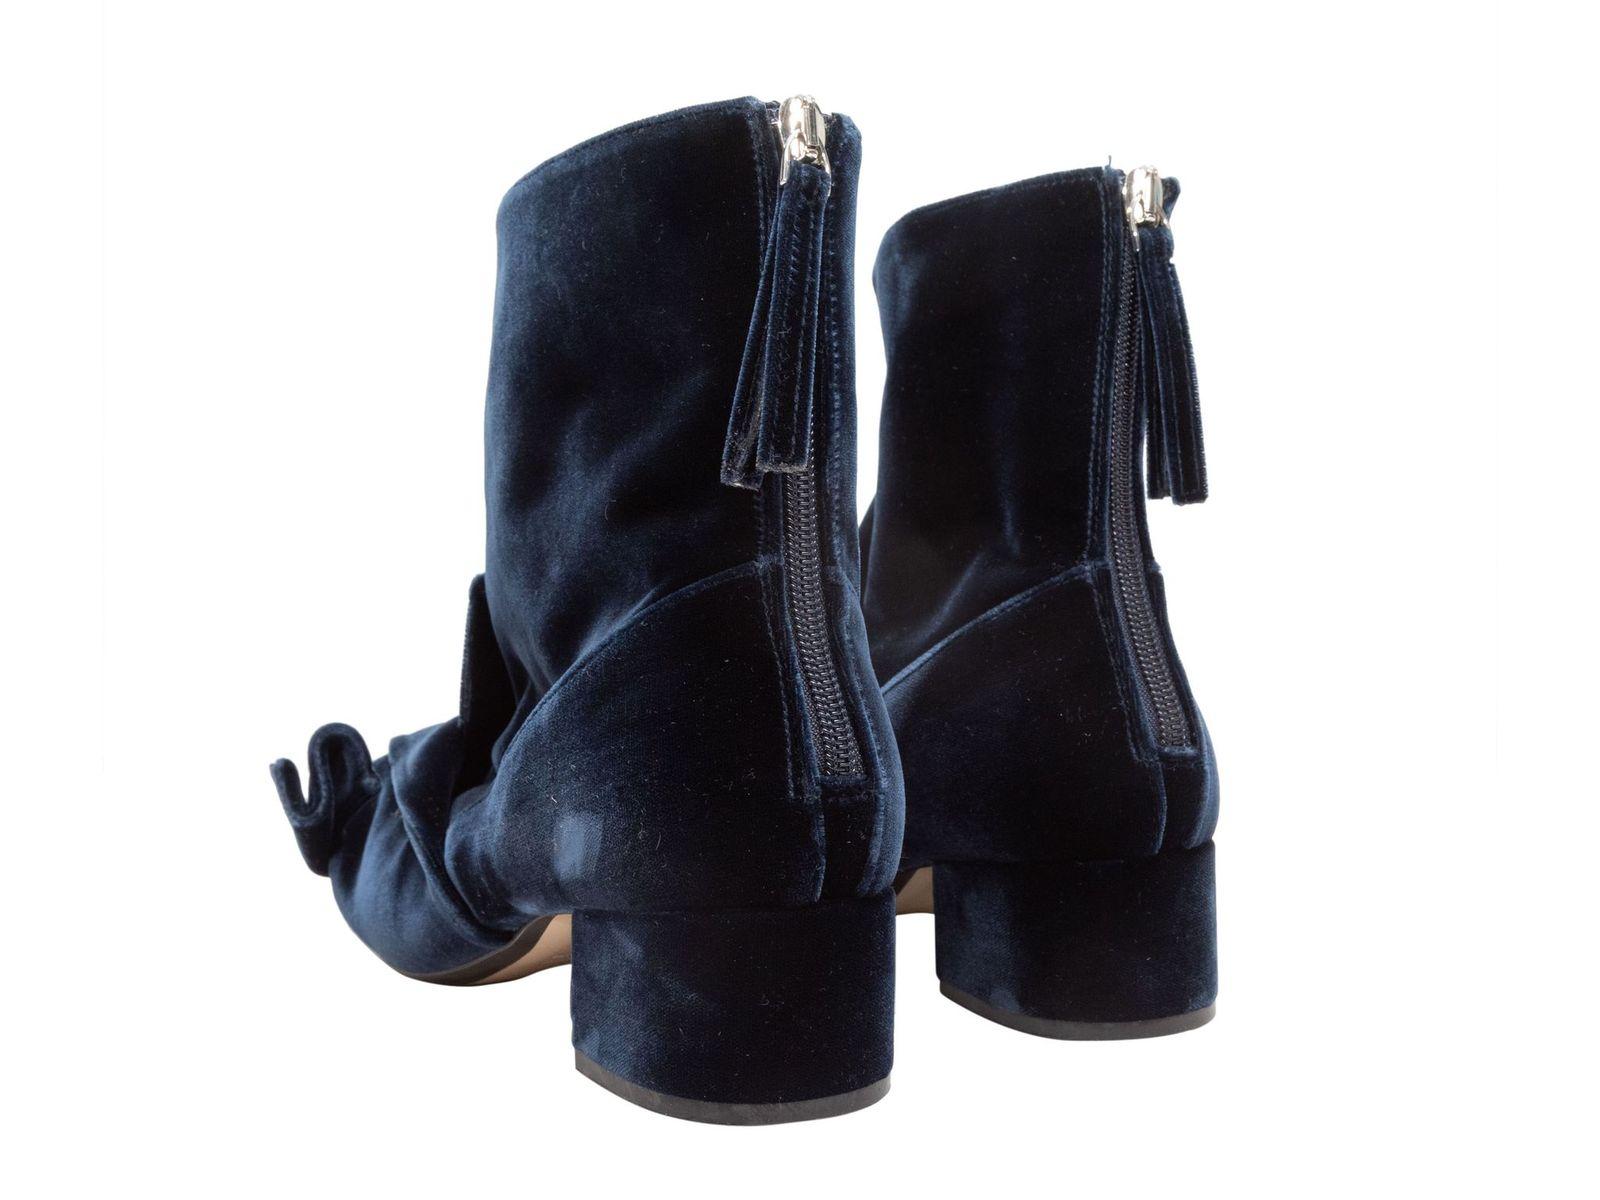 Women's N21 Navy Velvet Ruffle-Accented Ankle Boots